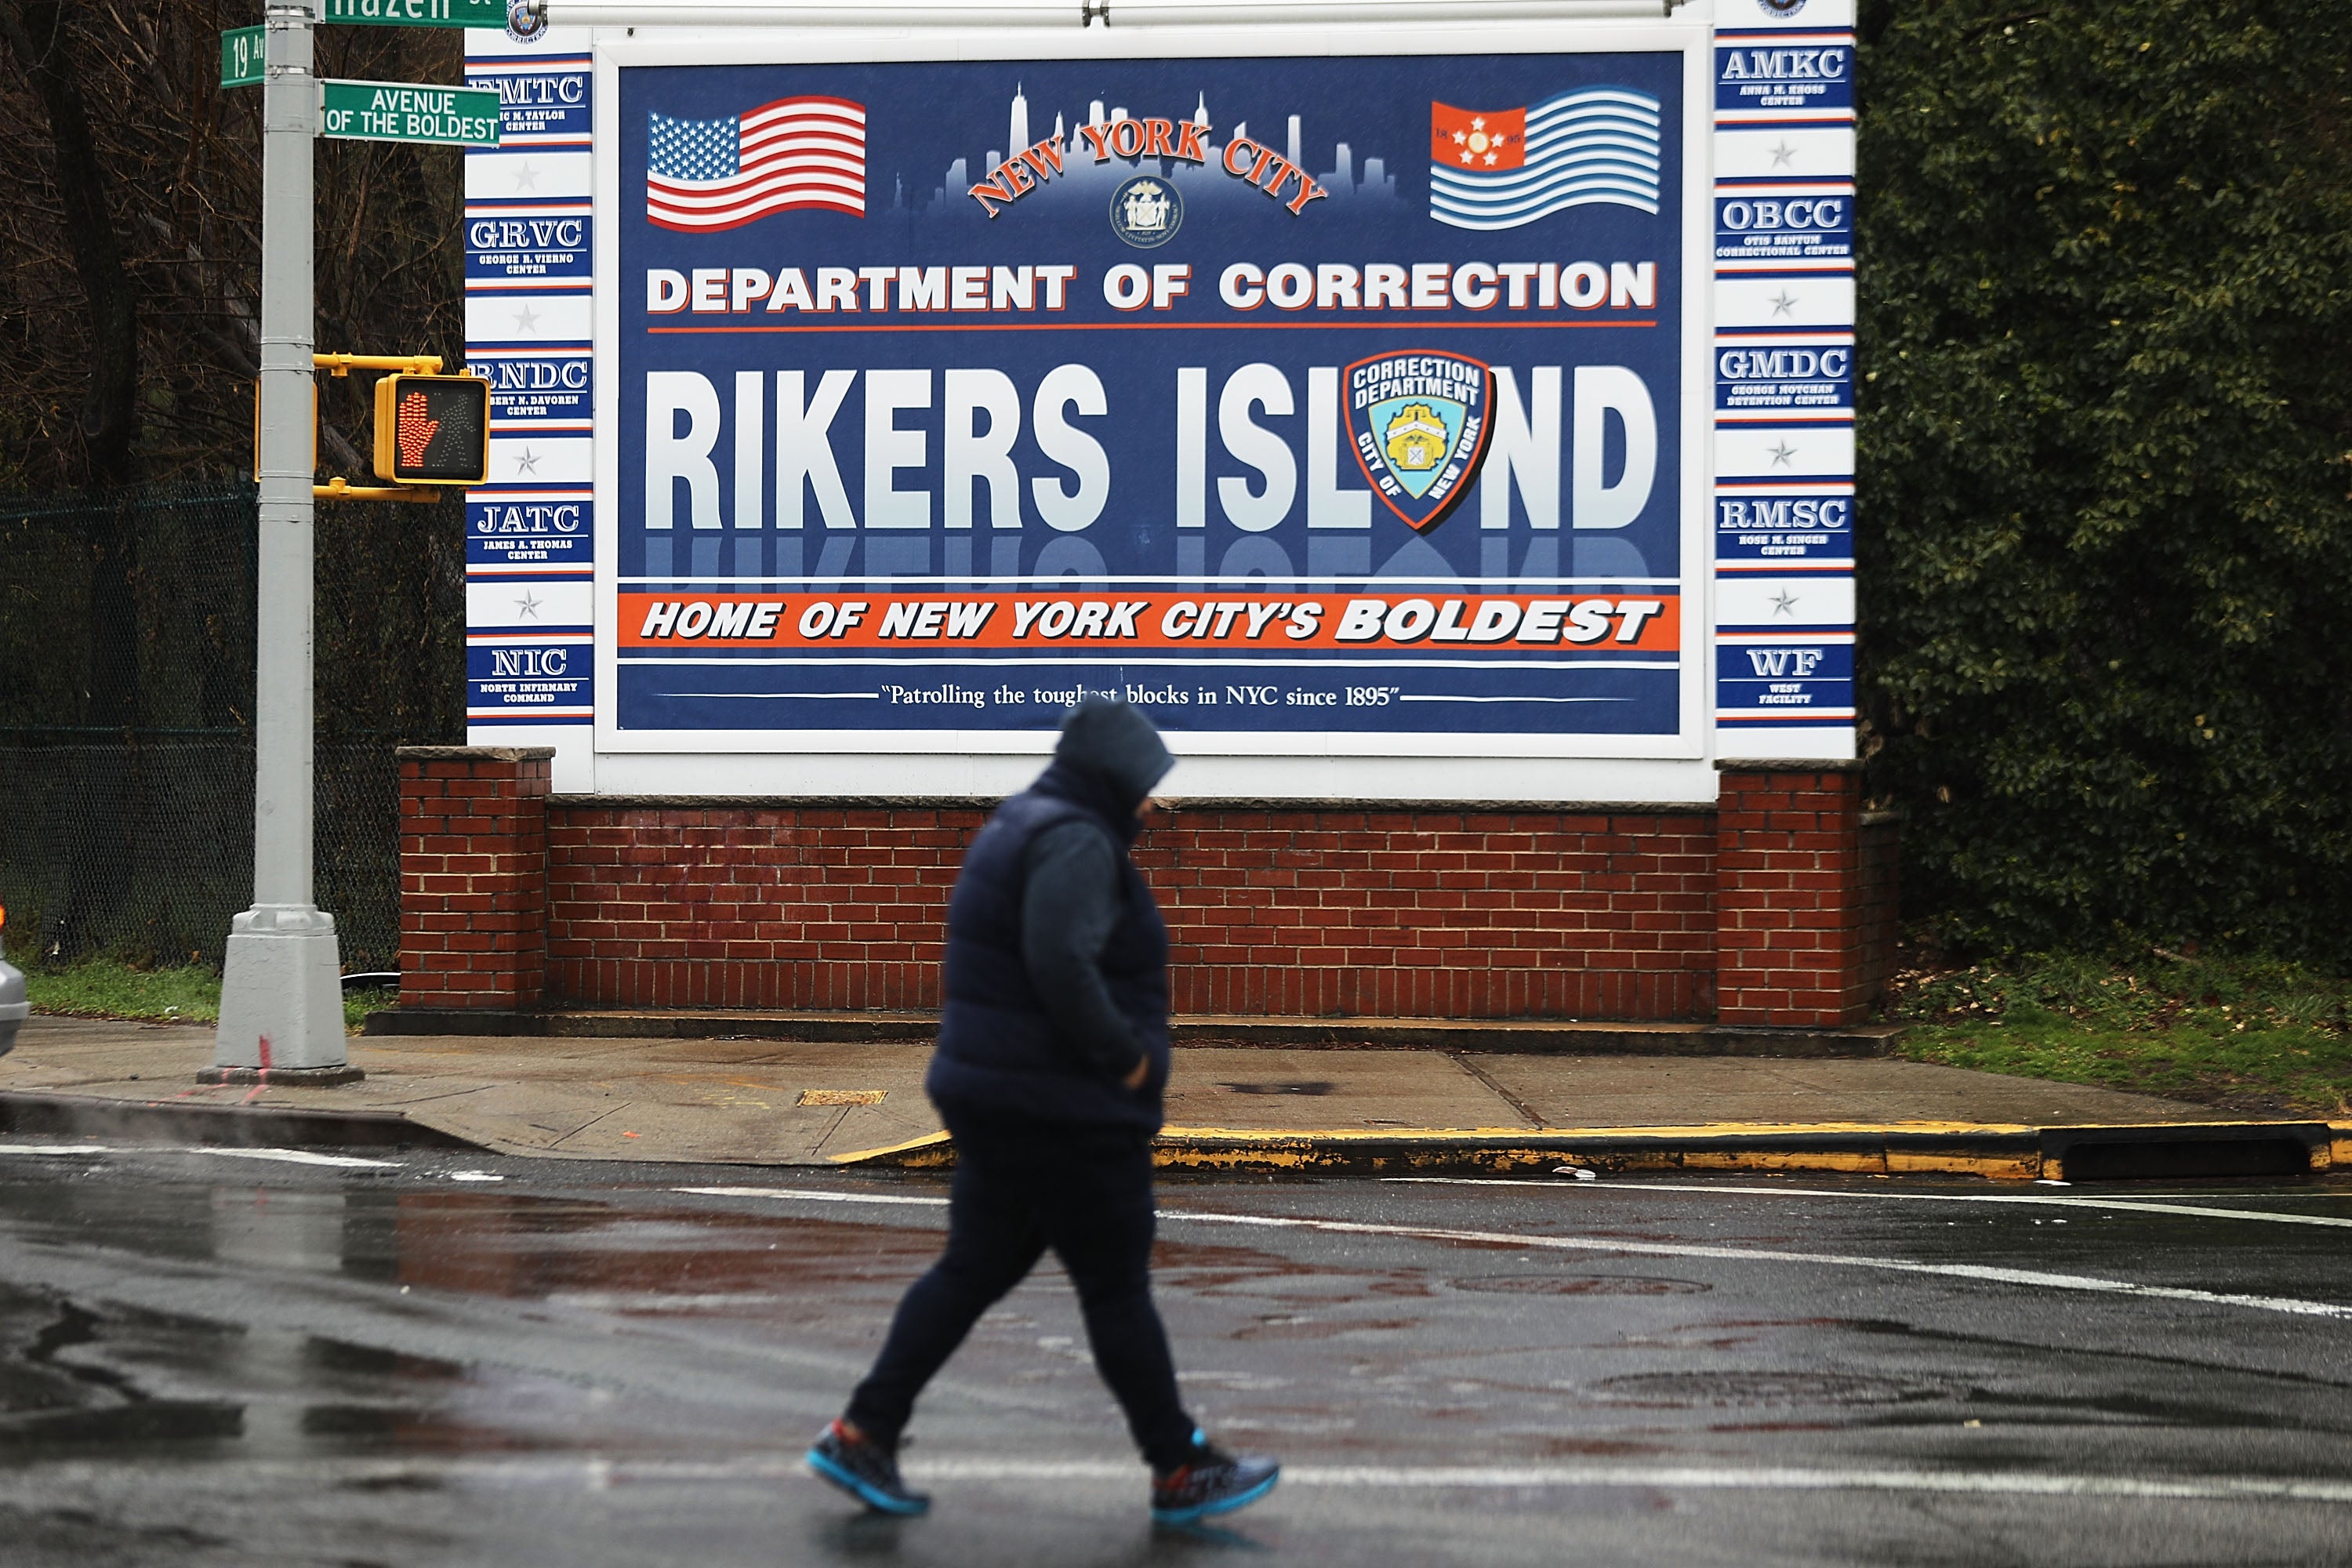 #CLOSErikers: Here’s Why The Entire Country Should Be Paying Attention To Rikers Island
